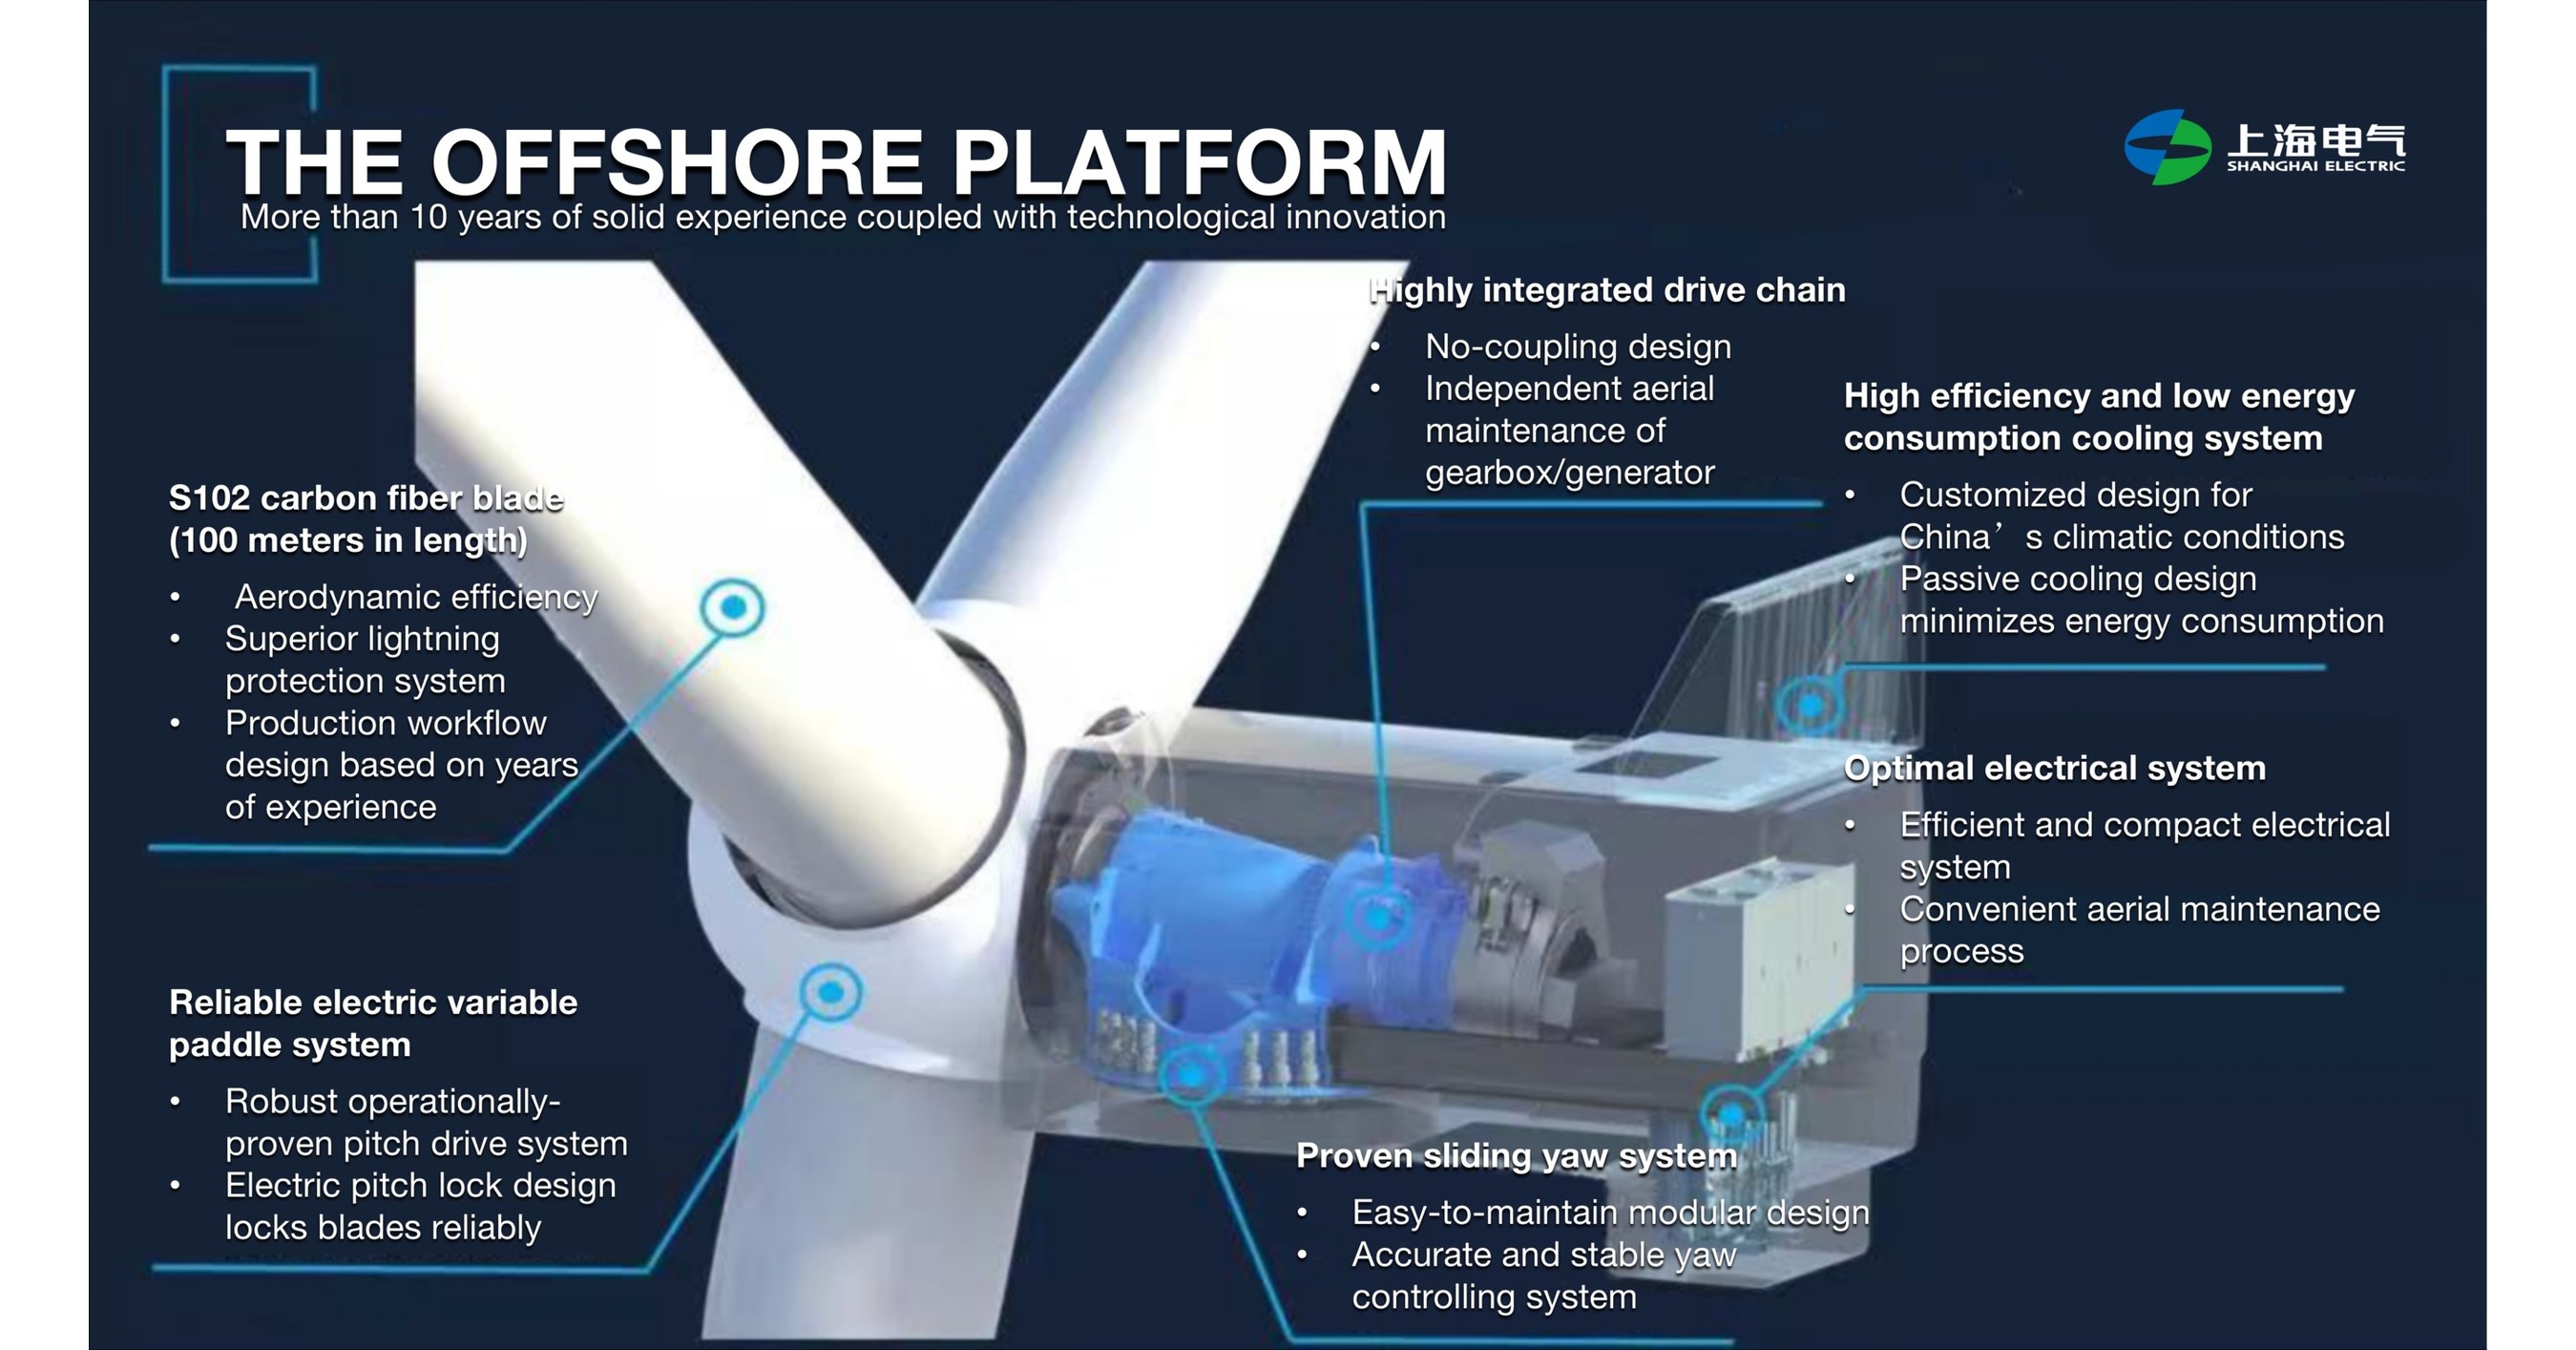 Shanghai Electric’s Offshore Wind Turbine Generator Designed for China’s Climate Rolls off Production Line